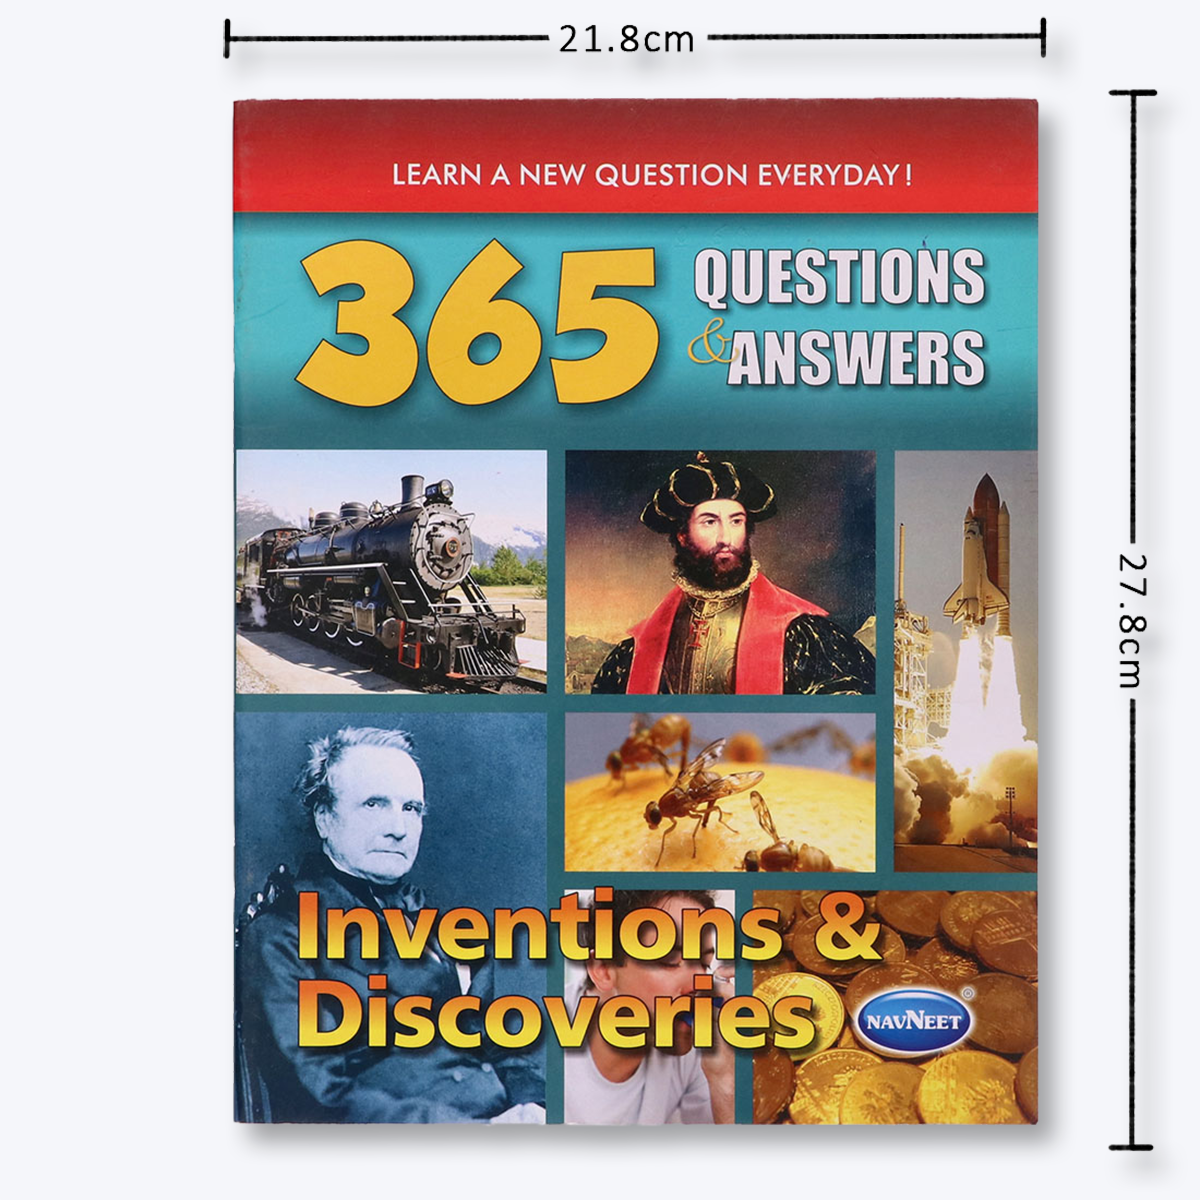 Navneet 365 Questions & Answers- Oceans & Rivers, Universe, Inventions & Discoveries for Kids- General Knowledge Books- Nourish Young Minds- Information and Facts